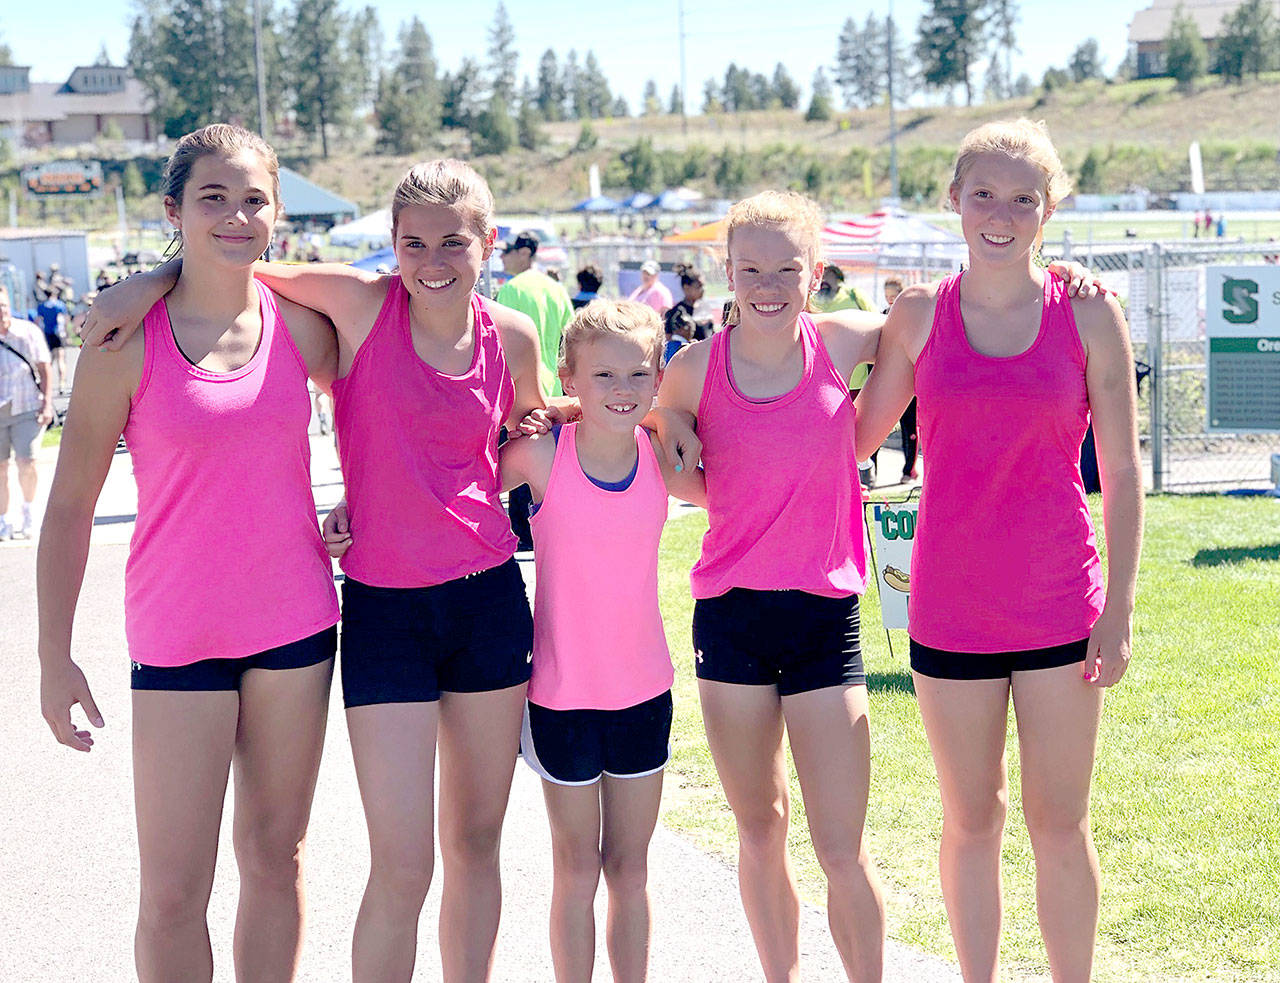 Members of the Olympic Peninsula Track Club competed in the USA Track and Field regionals this past weekend in Bend, Ore. From left are Eve Burke, Bailee Larson, Birdie Pyeatt, Riley Pyeatt and Jayde Gedelman. Larson and Riley Pyeatt qualified for the nationals to be held in Greensboro, N.C. July 23-28.